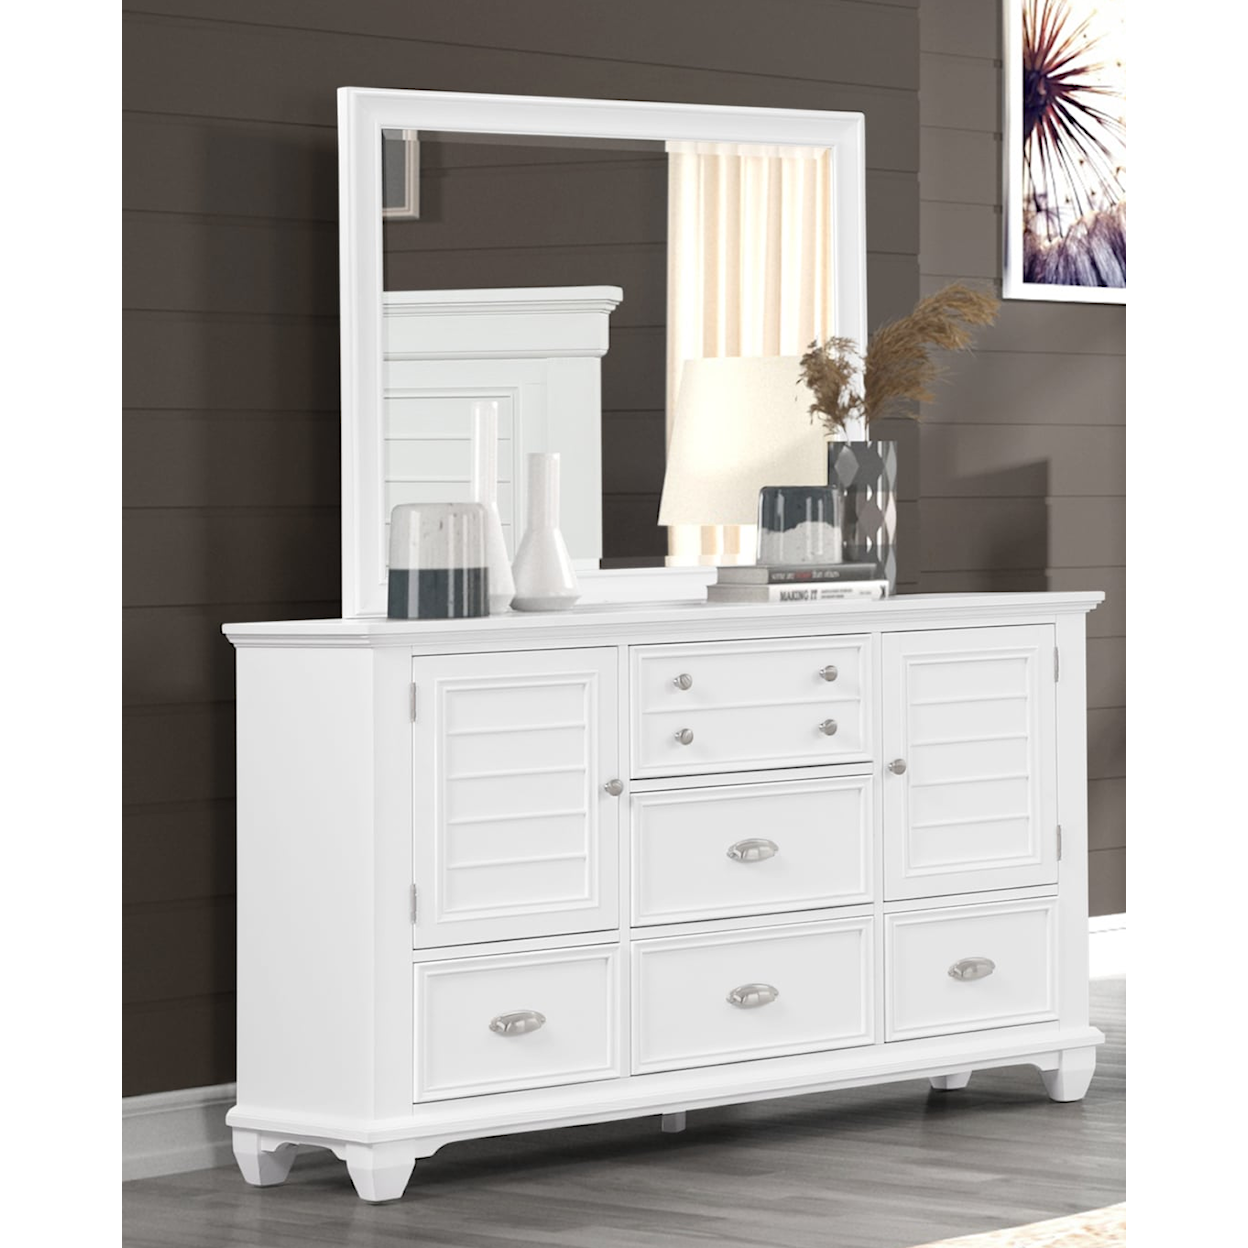 New Classic Furniture Jamestown Dresser with Attached Mirror